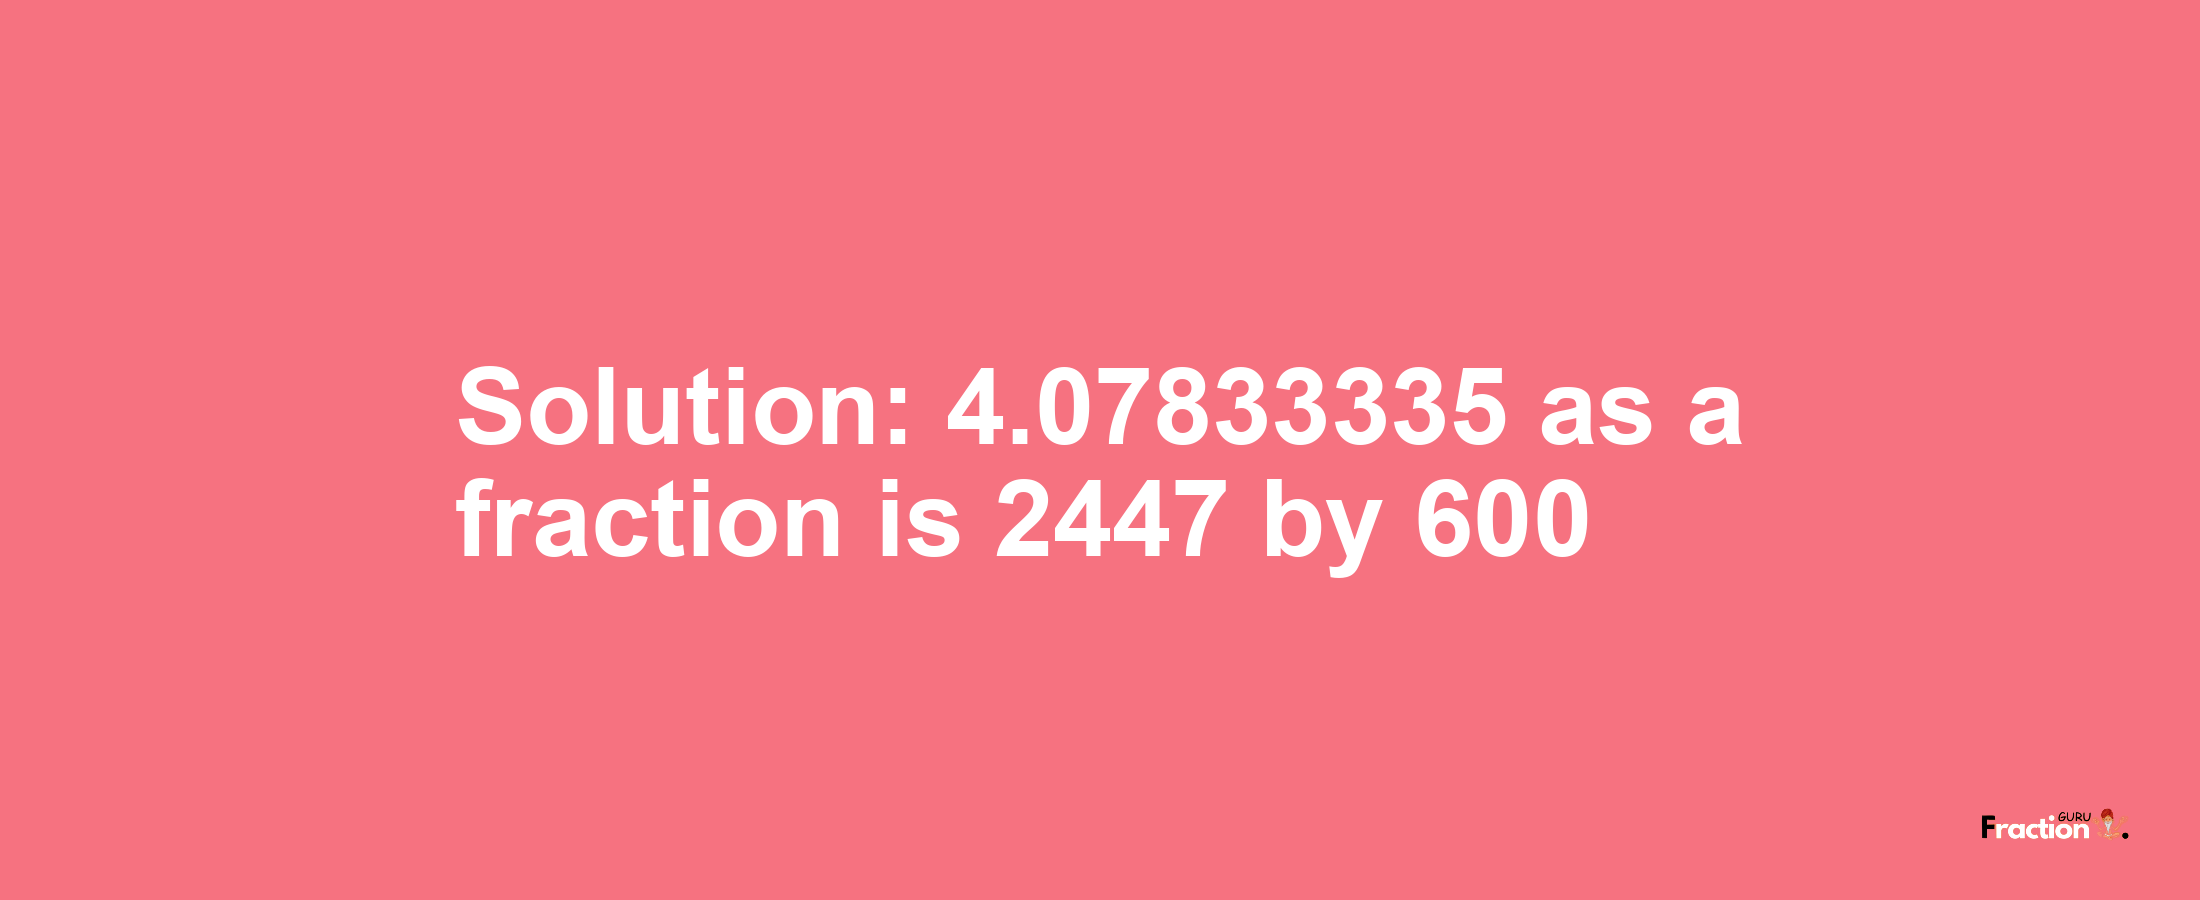 Solution:4.07833335 as a fraction is 2447/600